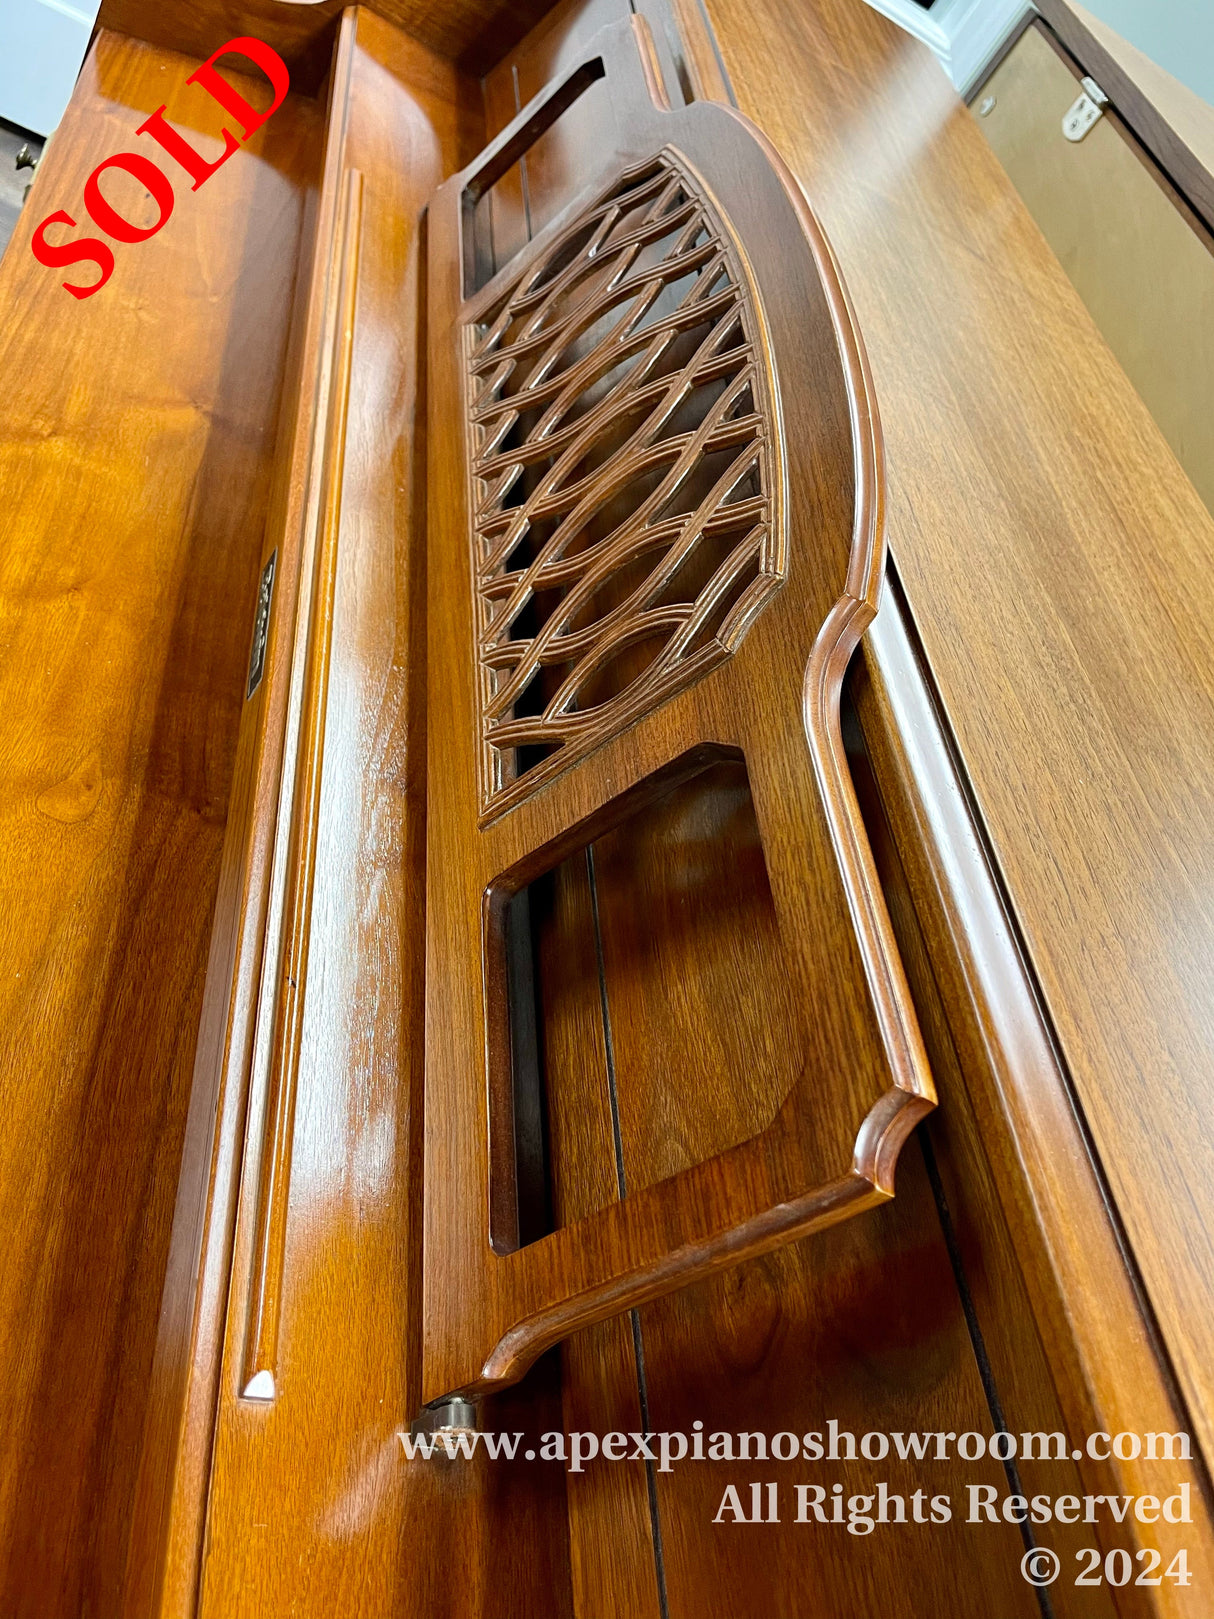 Close-up view of a wooden piano music desk with intricate lattice design, piano fallboard with handle, and the edge of the piano lid showing polished wood finish.